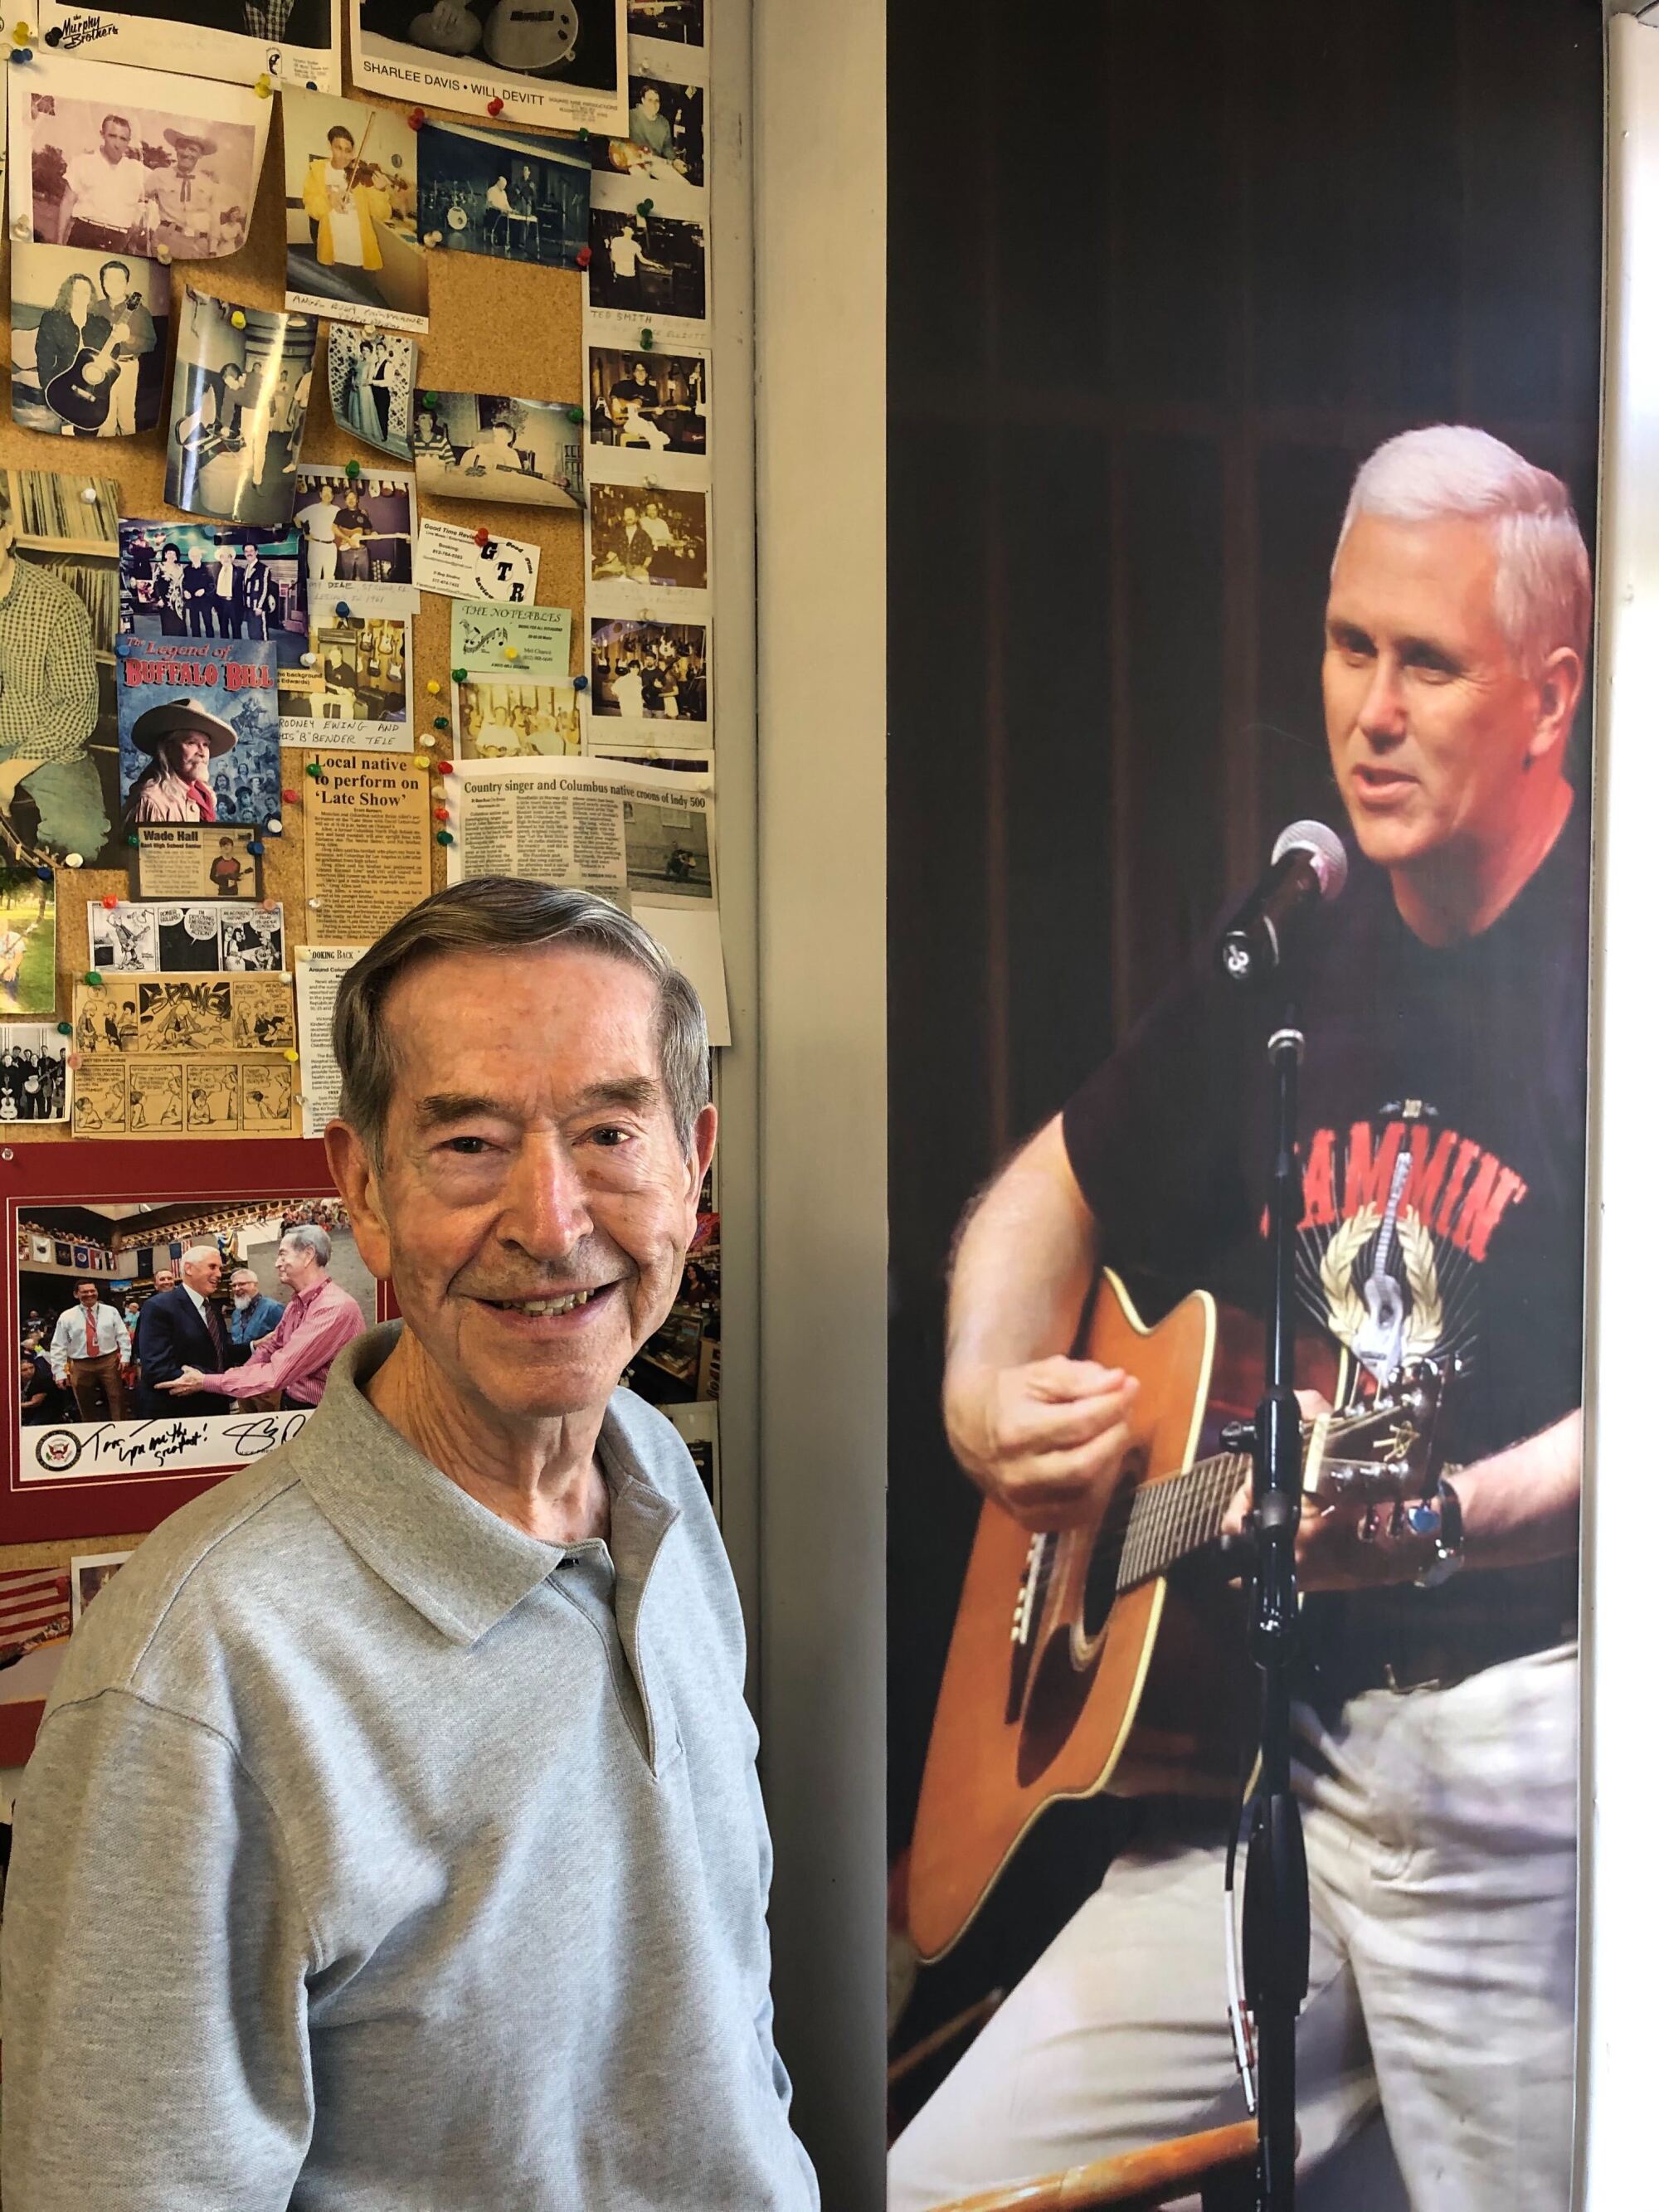 Tom Pickett at his Columbus, Ind., music shop next to a larger-than-life photo of Mike Pence playing guitar.